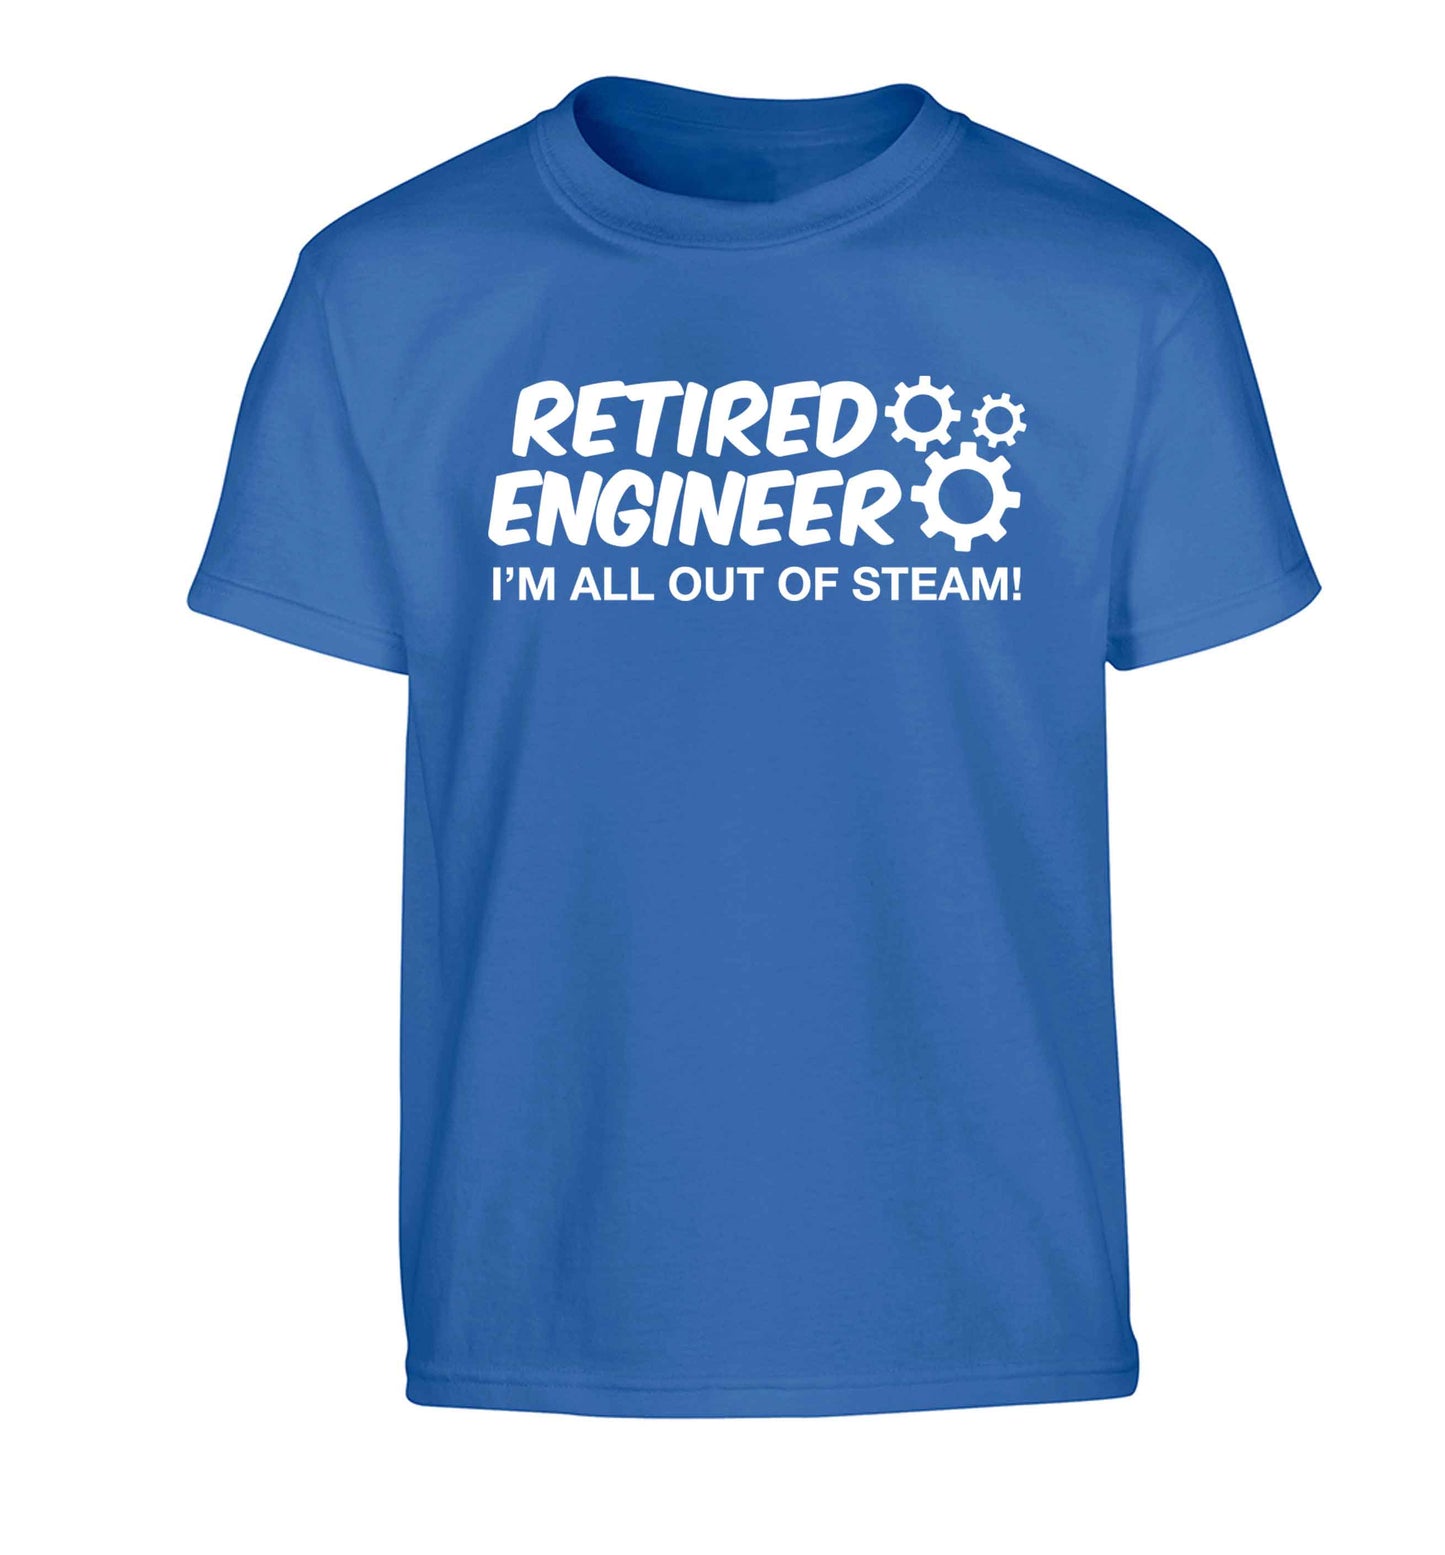 Retired engineer I'm all out of steam Children's blue Tshirt 12-13 Years